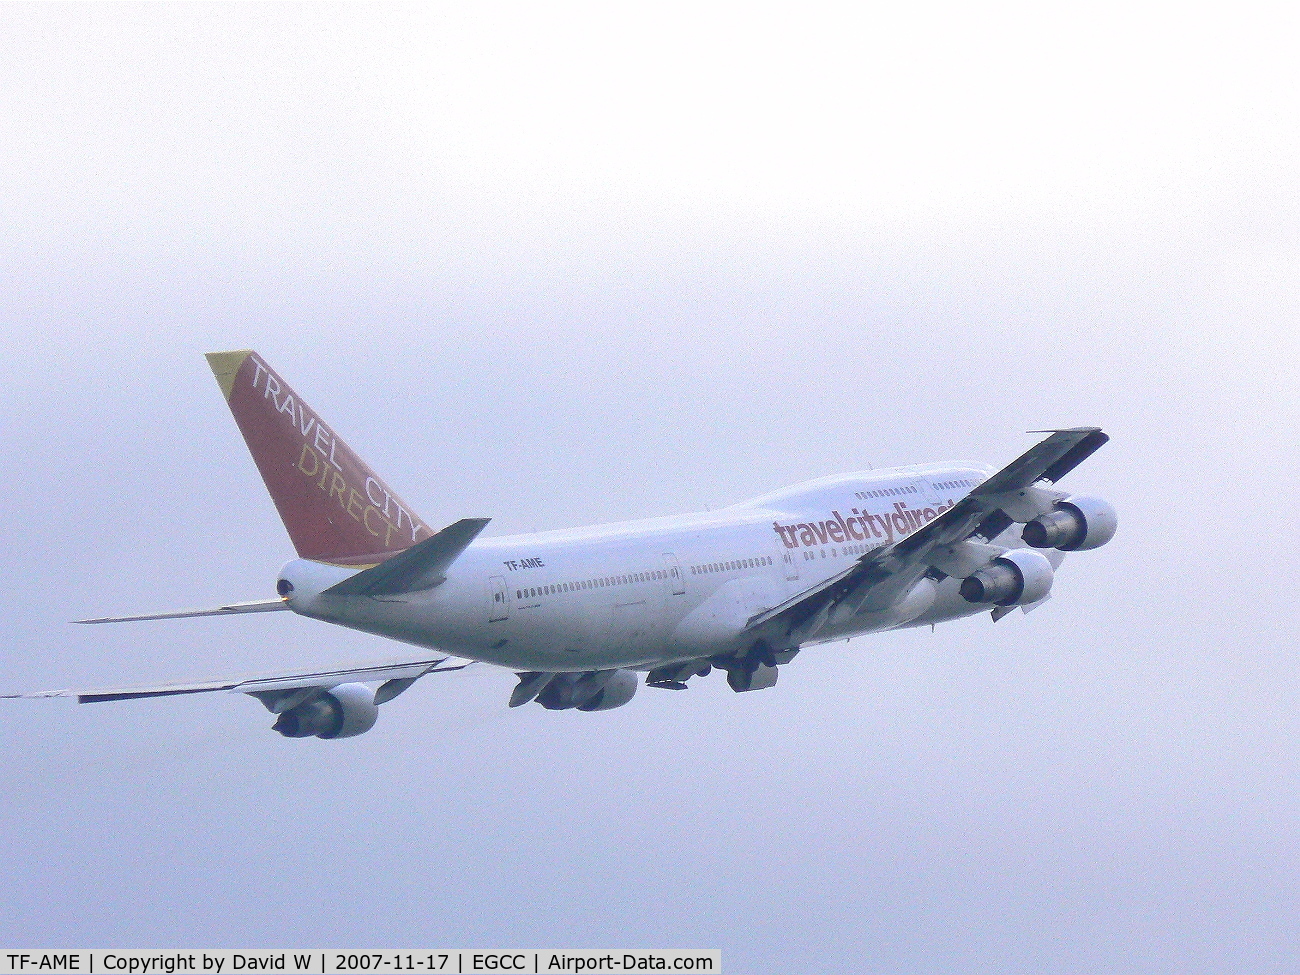 TF-AME, 1984 Boeing 747-312 C/N 23032, Taking off from Manchester.